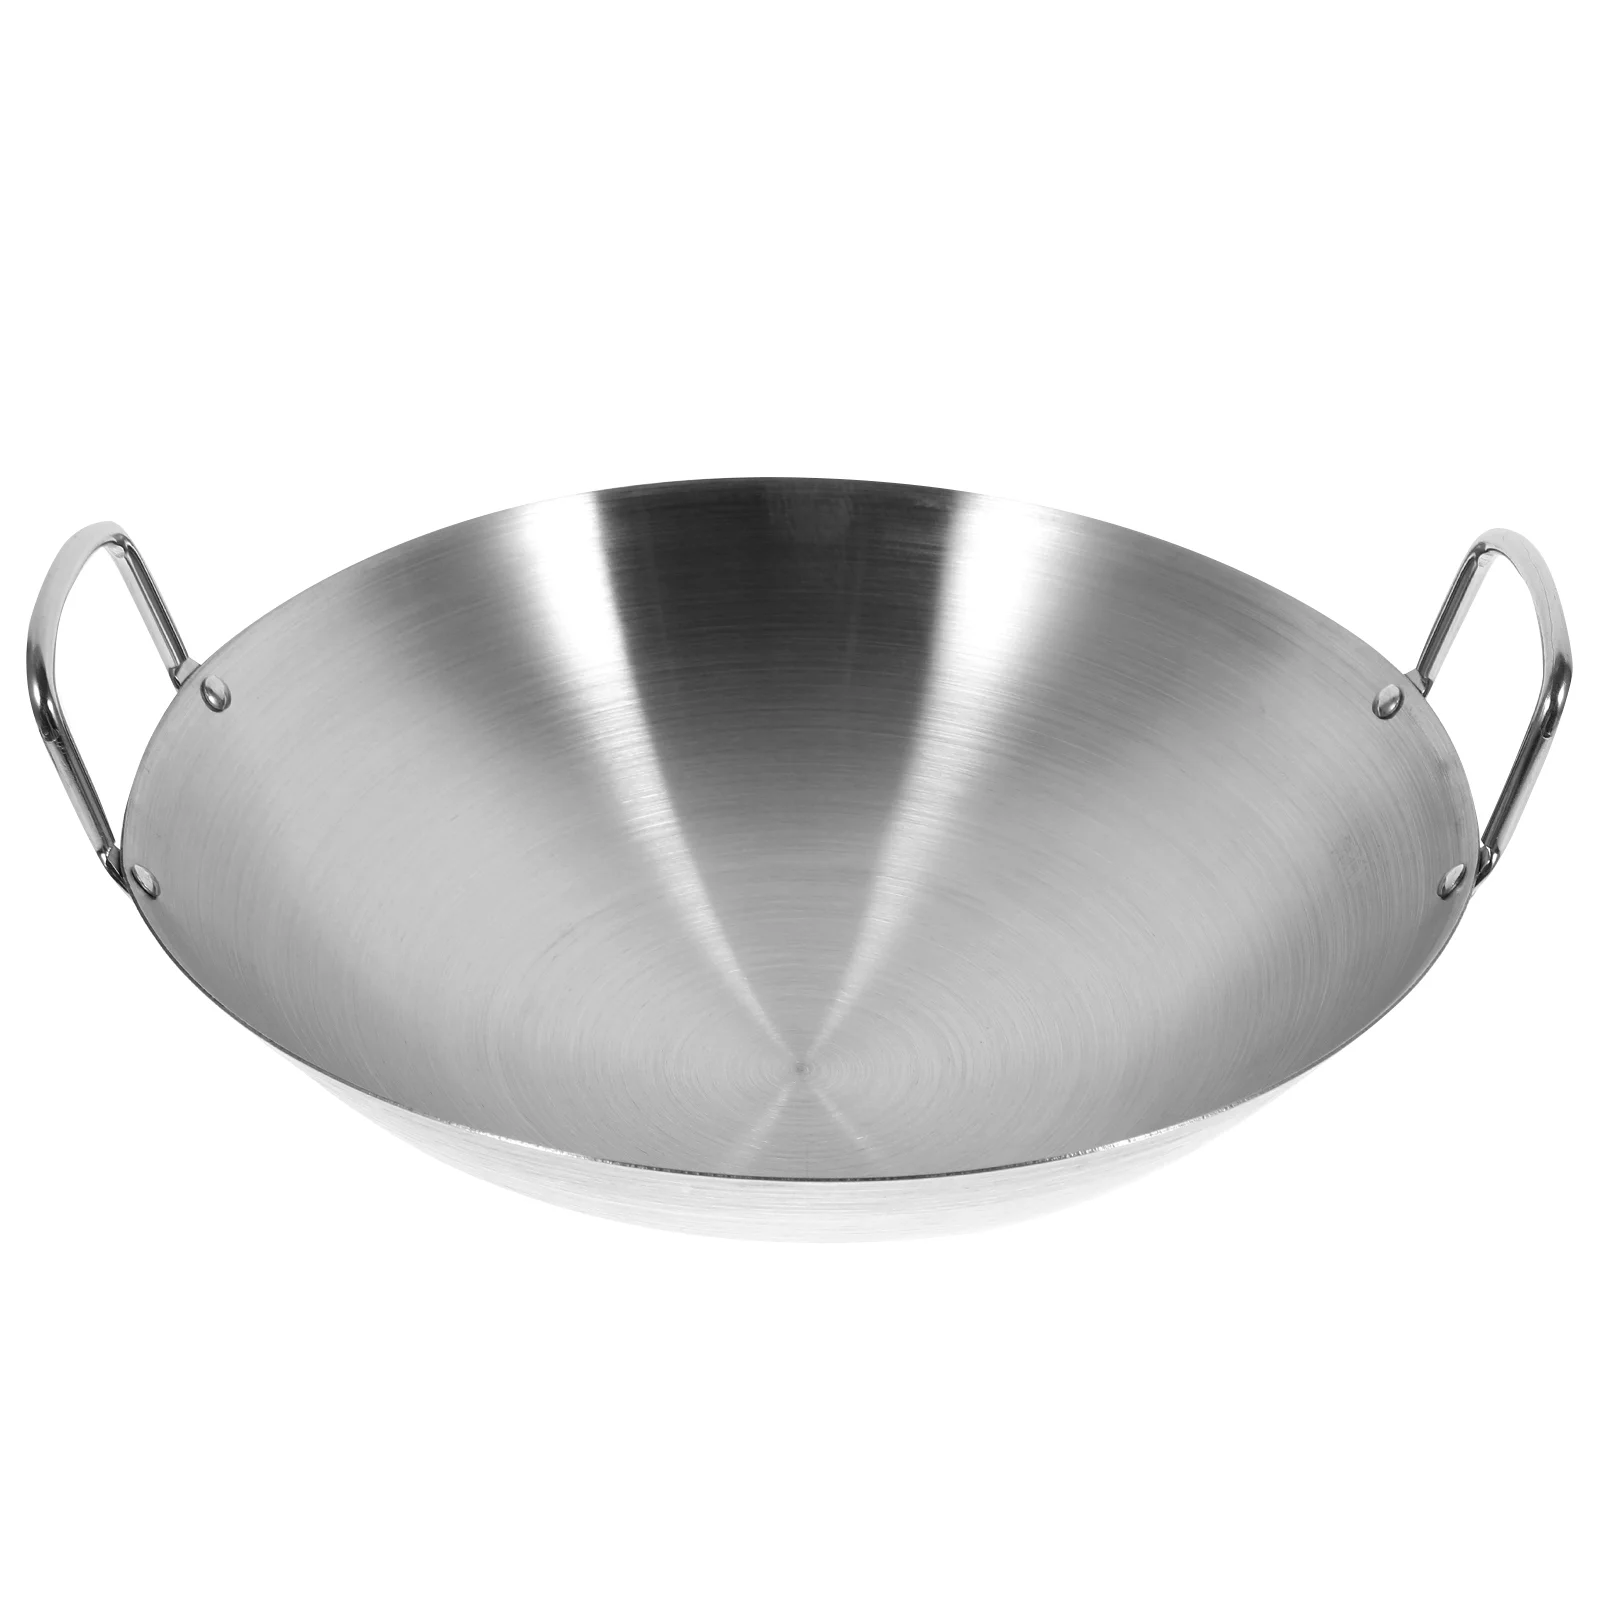 

Stainless Steel Wok Cooking Pot Double Handle Enamel Baking Trays Kitchen Gadget Household Work Non Stick Induction Frying Pan